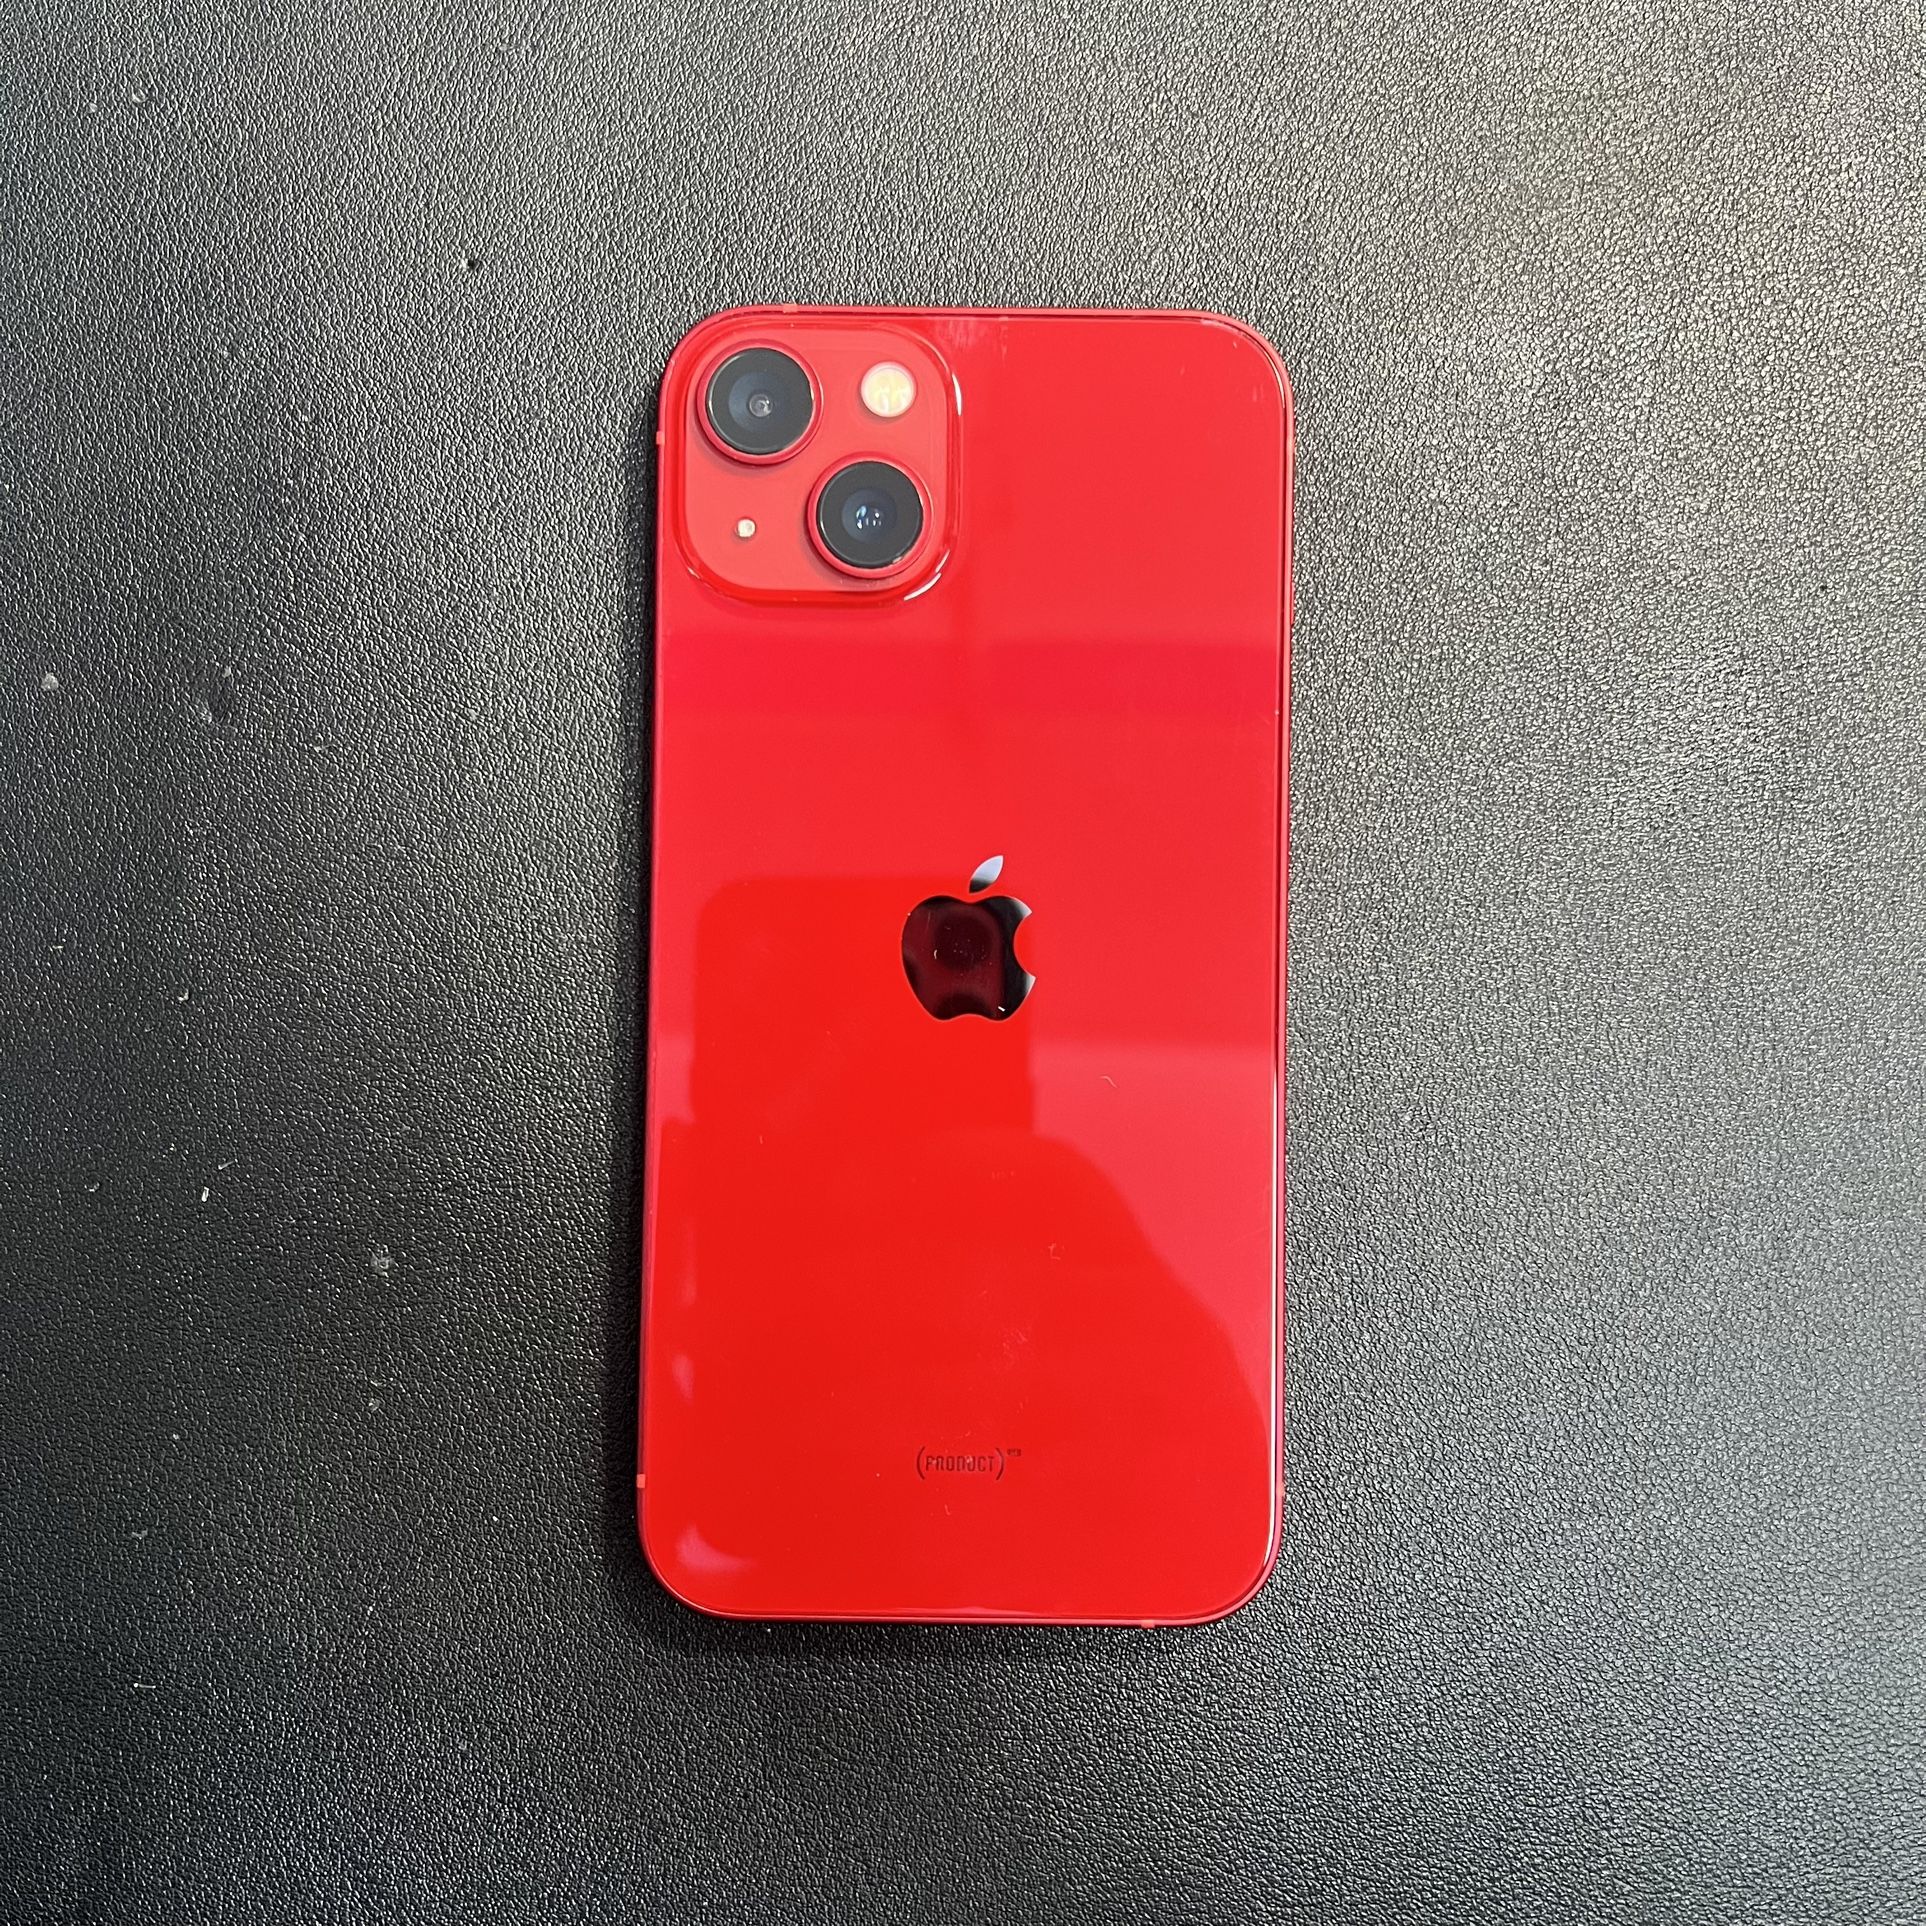 Used iPhone 13 128GB RED UNLOCKED- Perfect Condition 